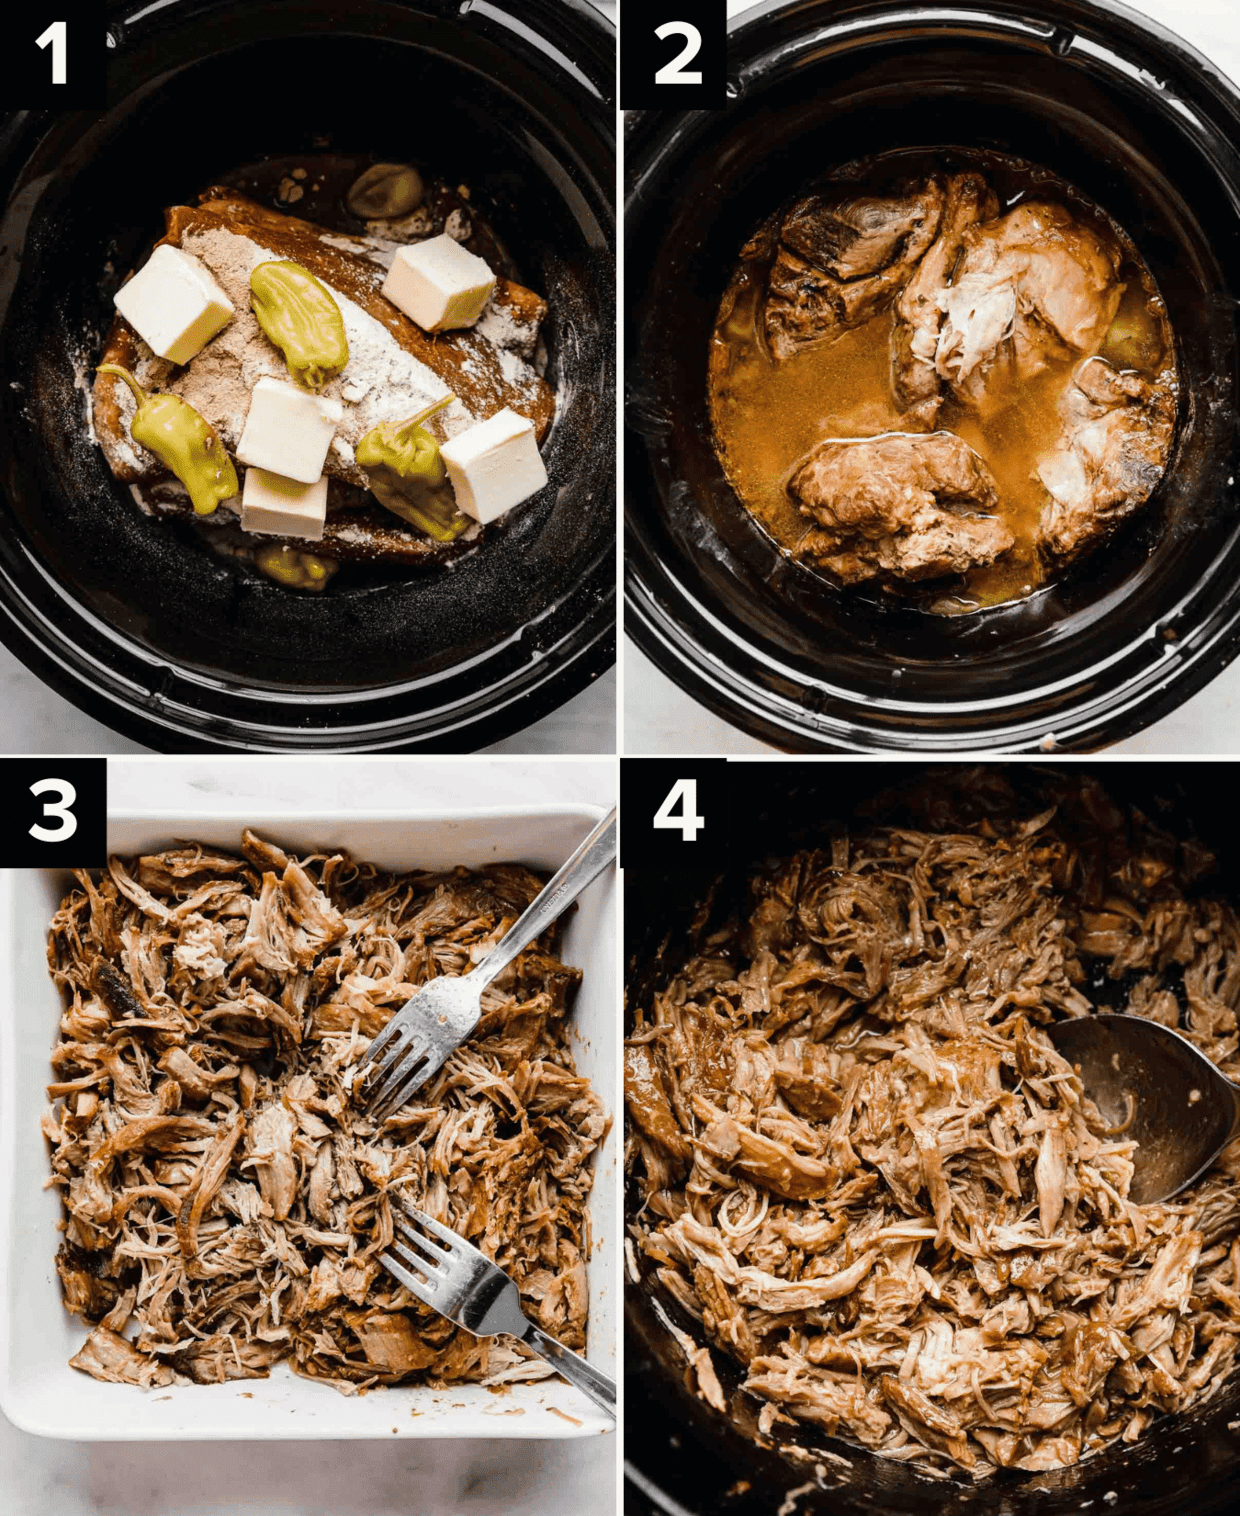 Four images showing how to make a Mississippi Pork Roast in the crock pot, top left is pork shoulder topped with butter and pepperoncini peppers, top right is the meat cooked in a slow cooker, bottom left is shredded pork roast in a white square pan, bottom right is shredded pork roast in a black crockpot.